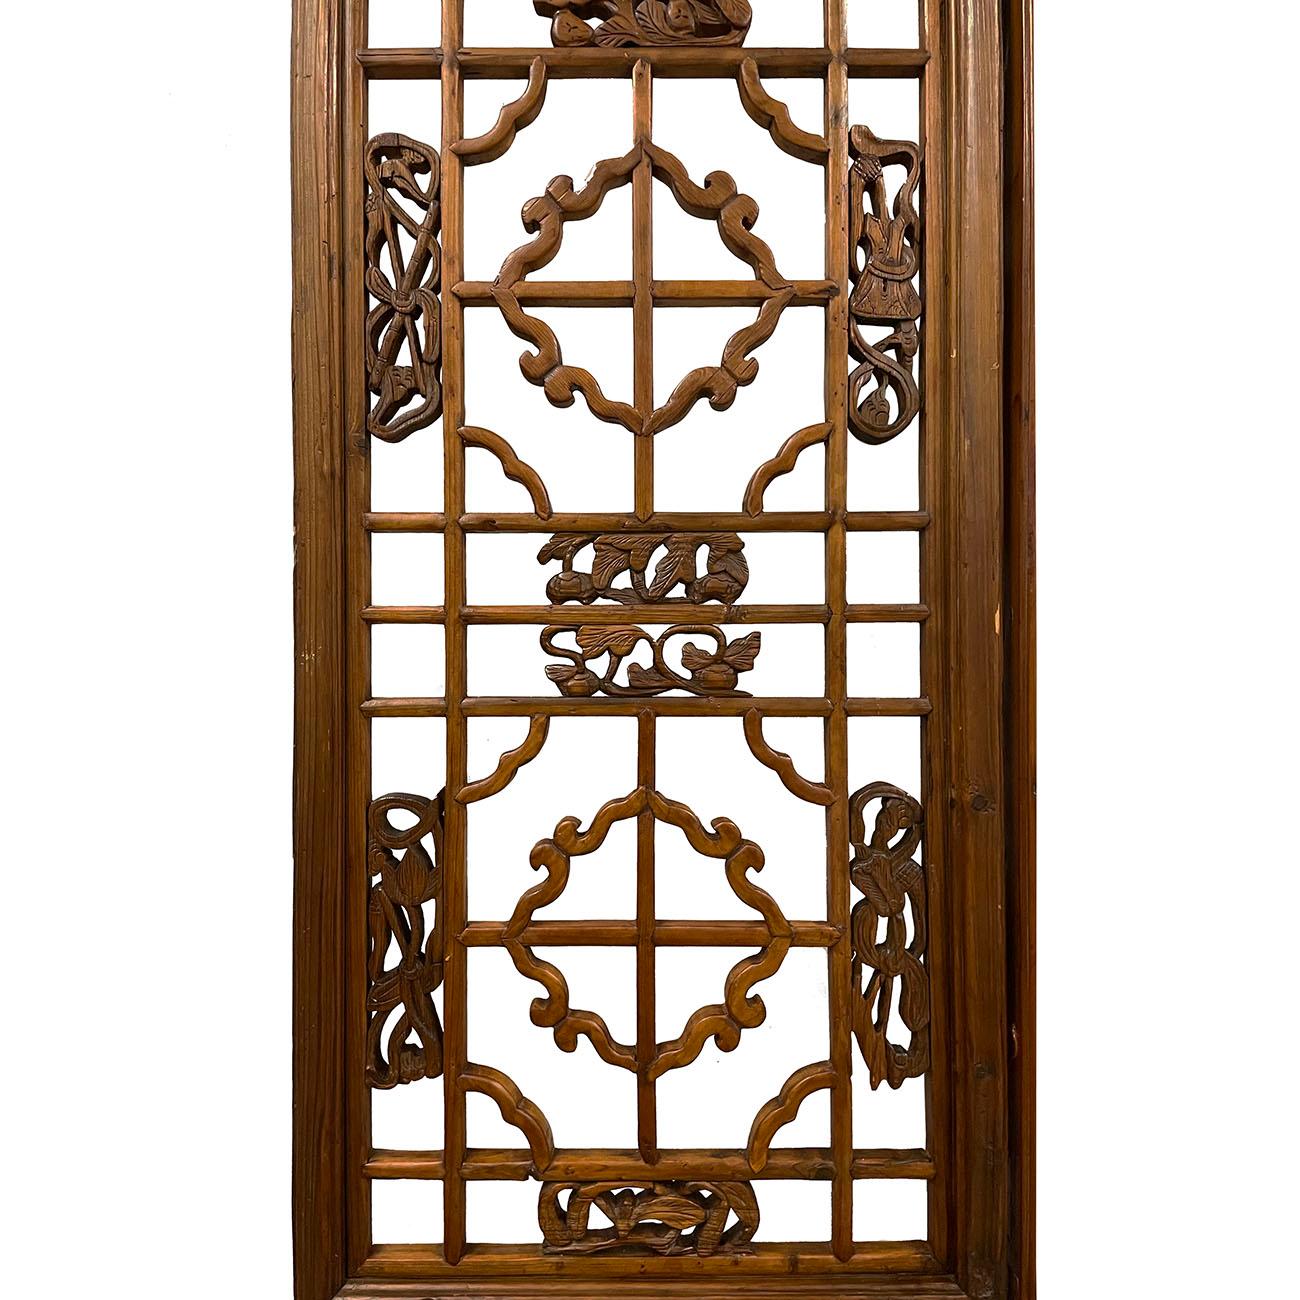 Late 19th Century Antique Chinese Handcrafted 3 Panel Wooden Screen/Room Divider In Good Condition For Sale In Pomona, CA